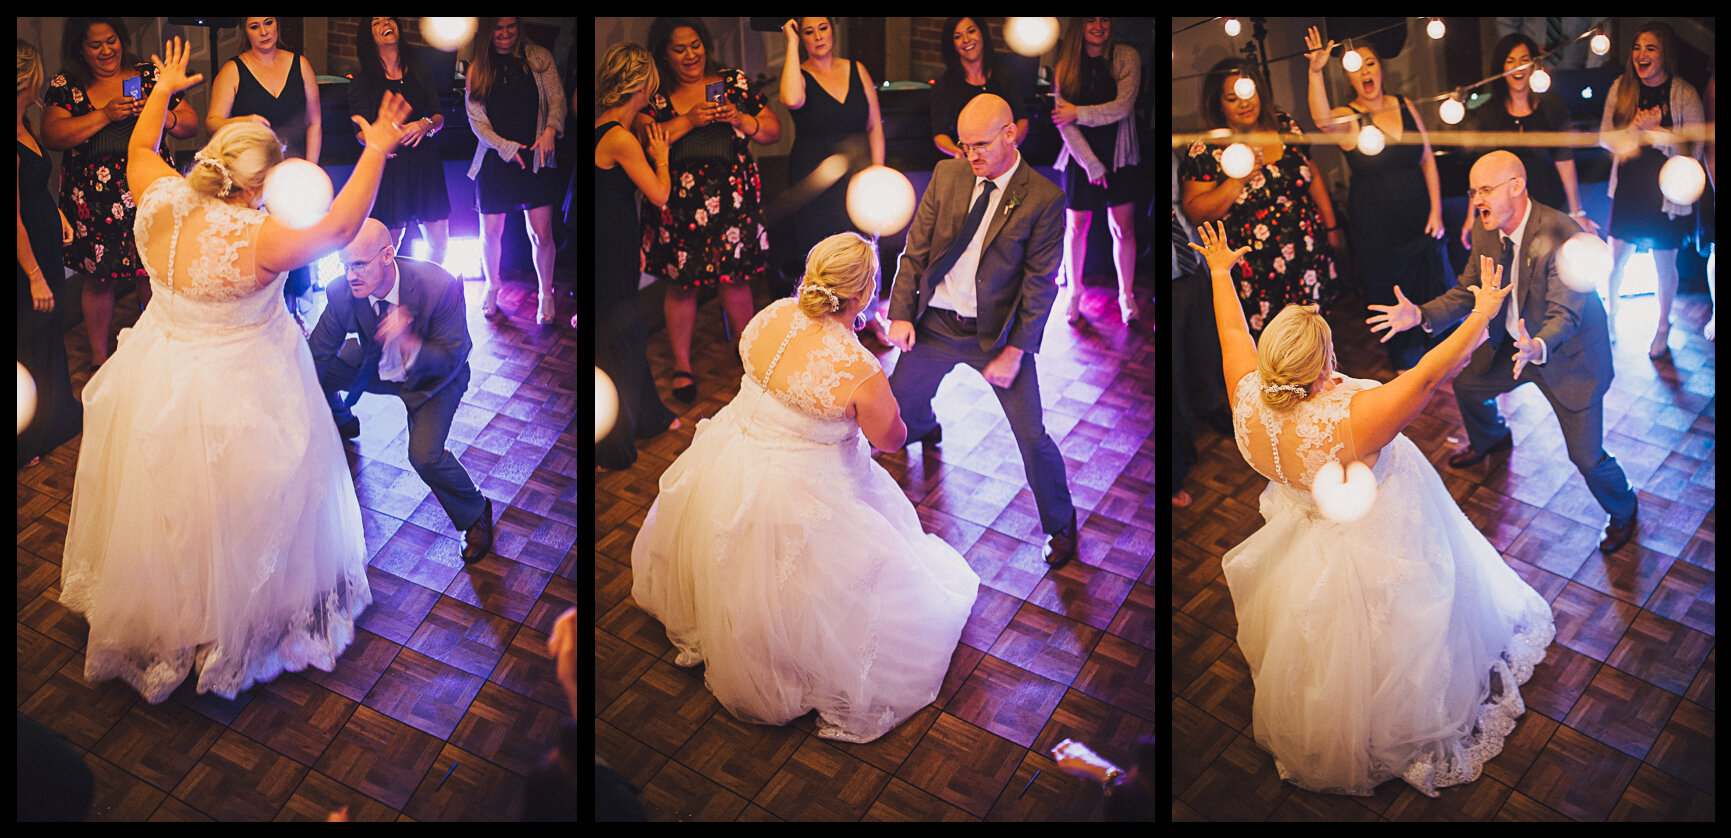 breighton-and-basette-photography-copyrighted-image-blog-jennifer-and-sean-wedding-collage-018.jpg